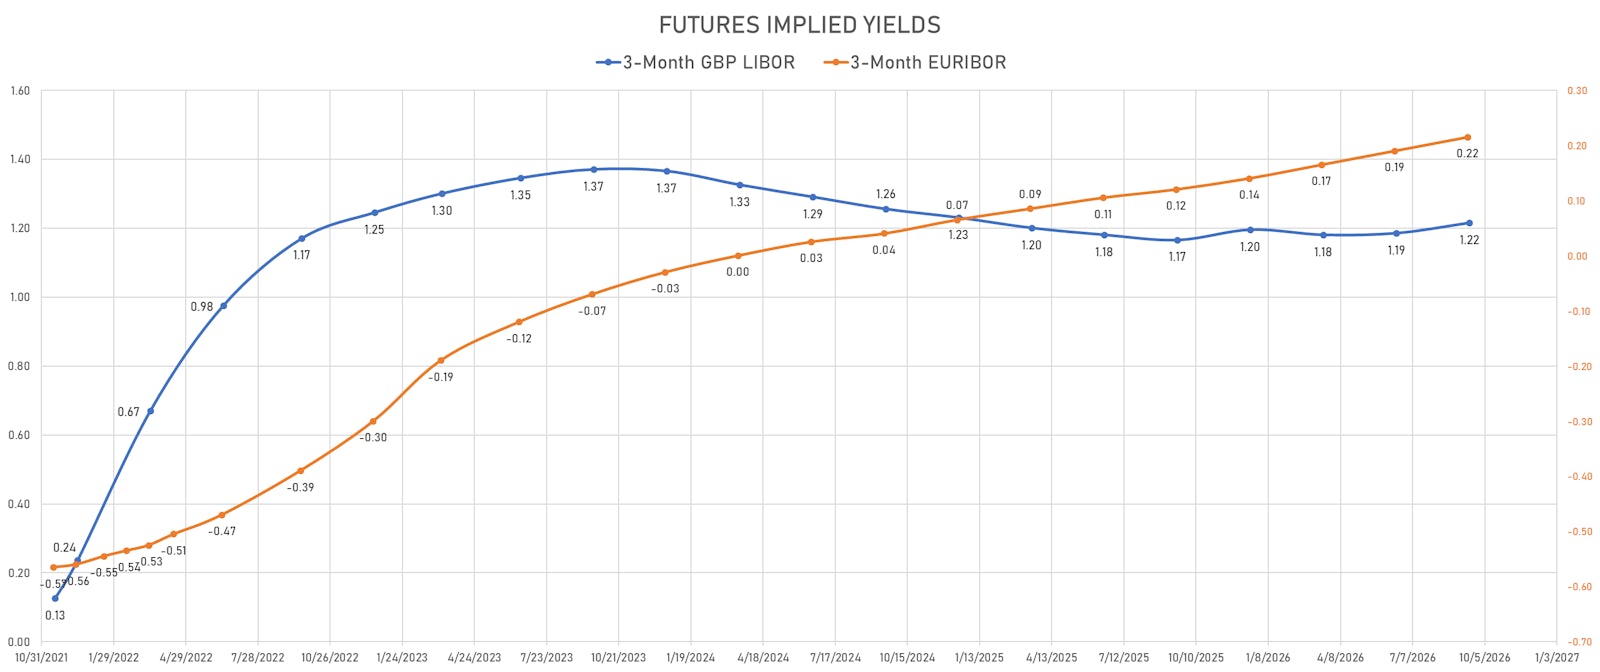 3-Month GBP LIBOR & EURIBOR Futures Implied Yields | Sources: ϕpost, Refinitiv data